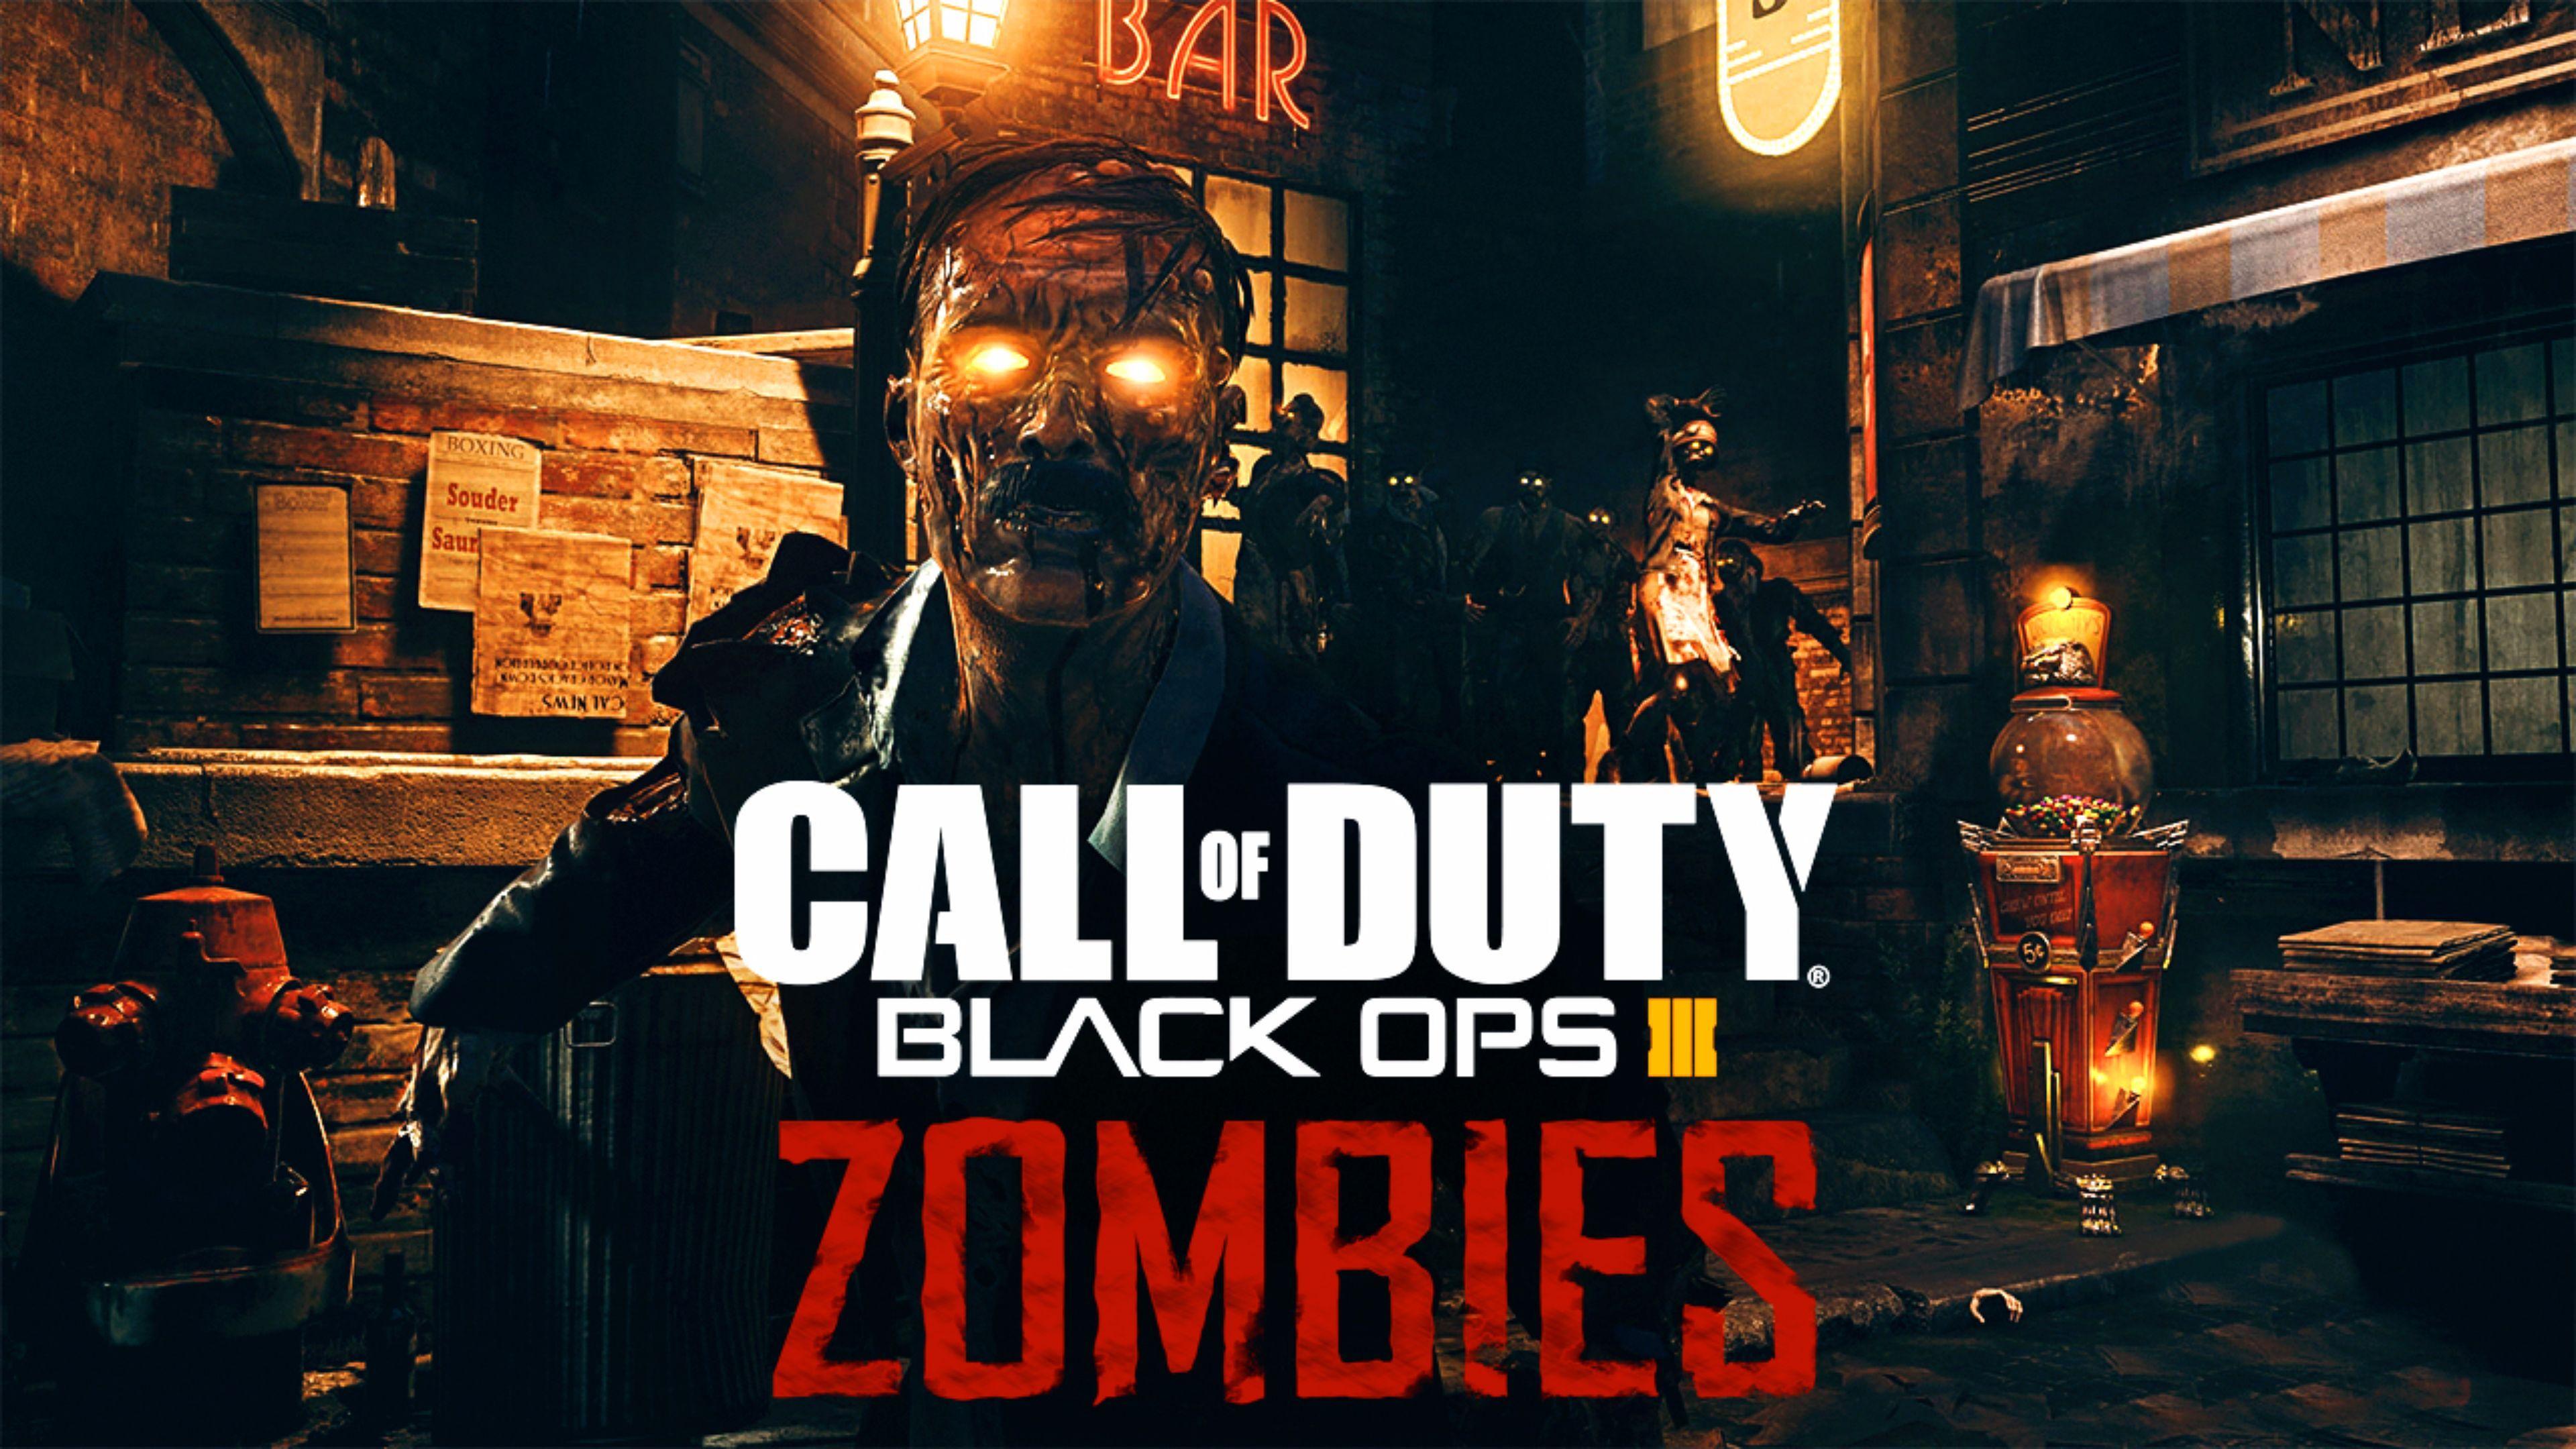 call of duty black ops 3 zombies chronicles dlc